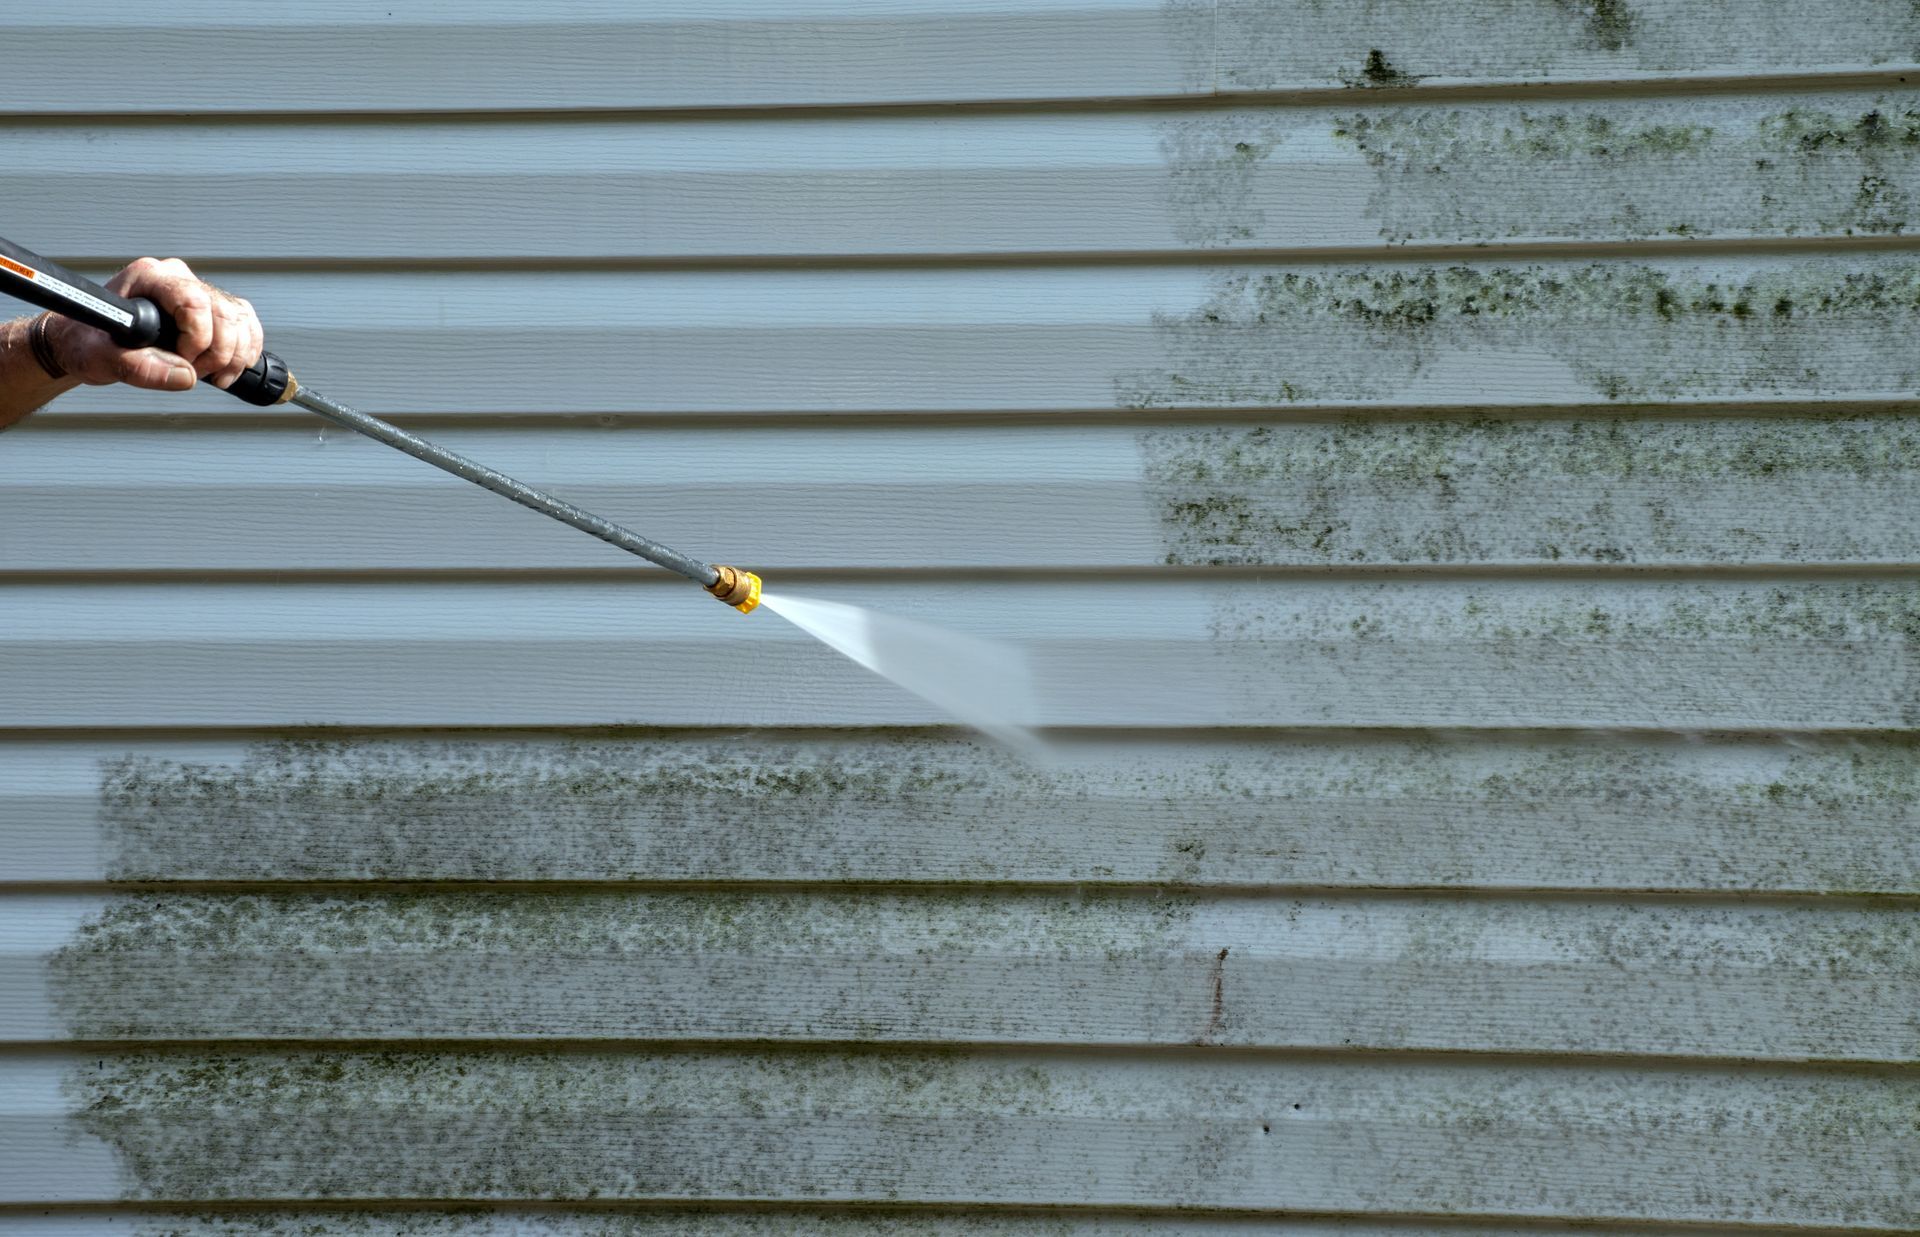 a person is using a high pressure washer to clean a house siding